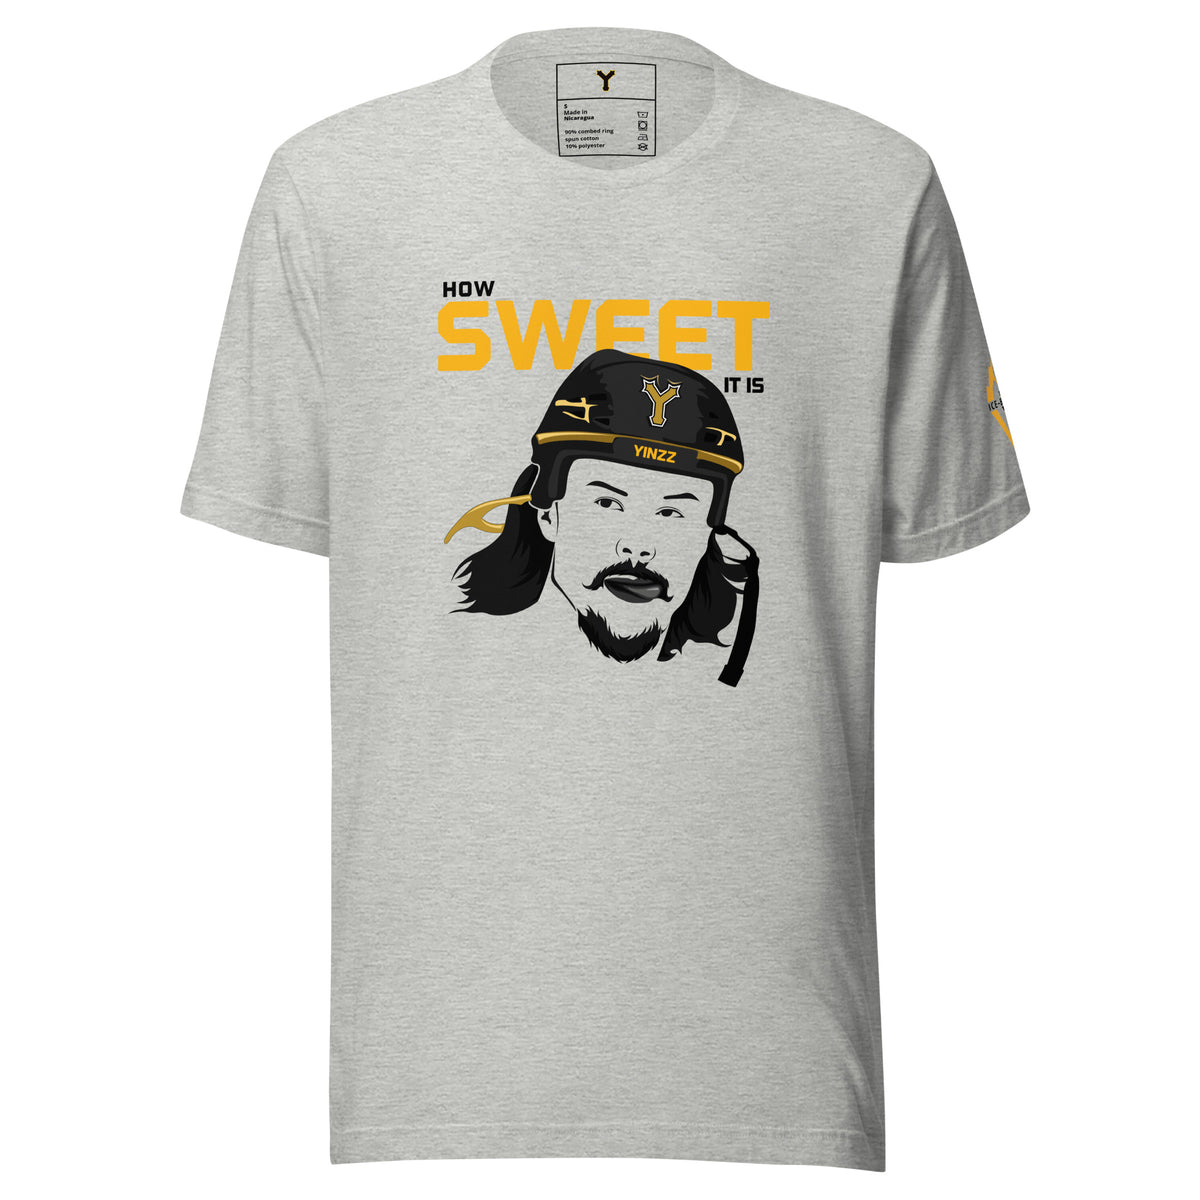 "HOW SWEDE IT IS" Karlsson